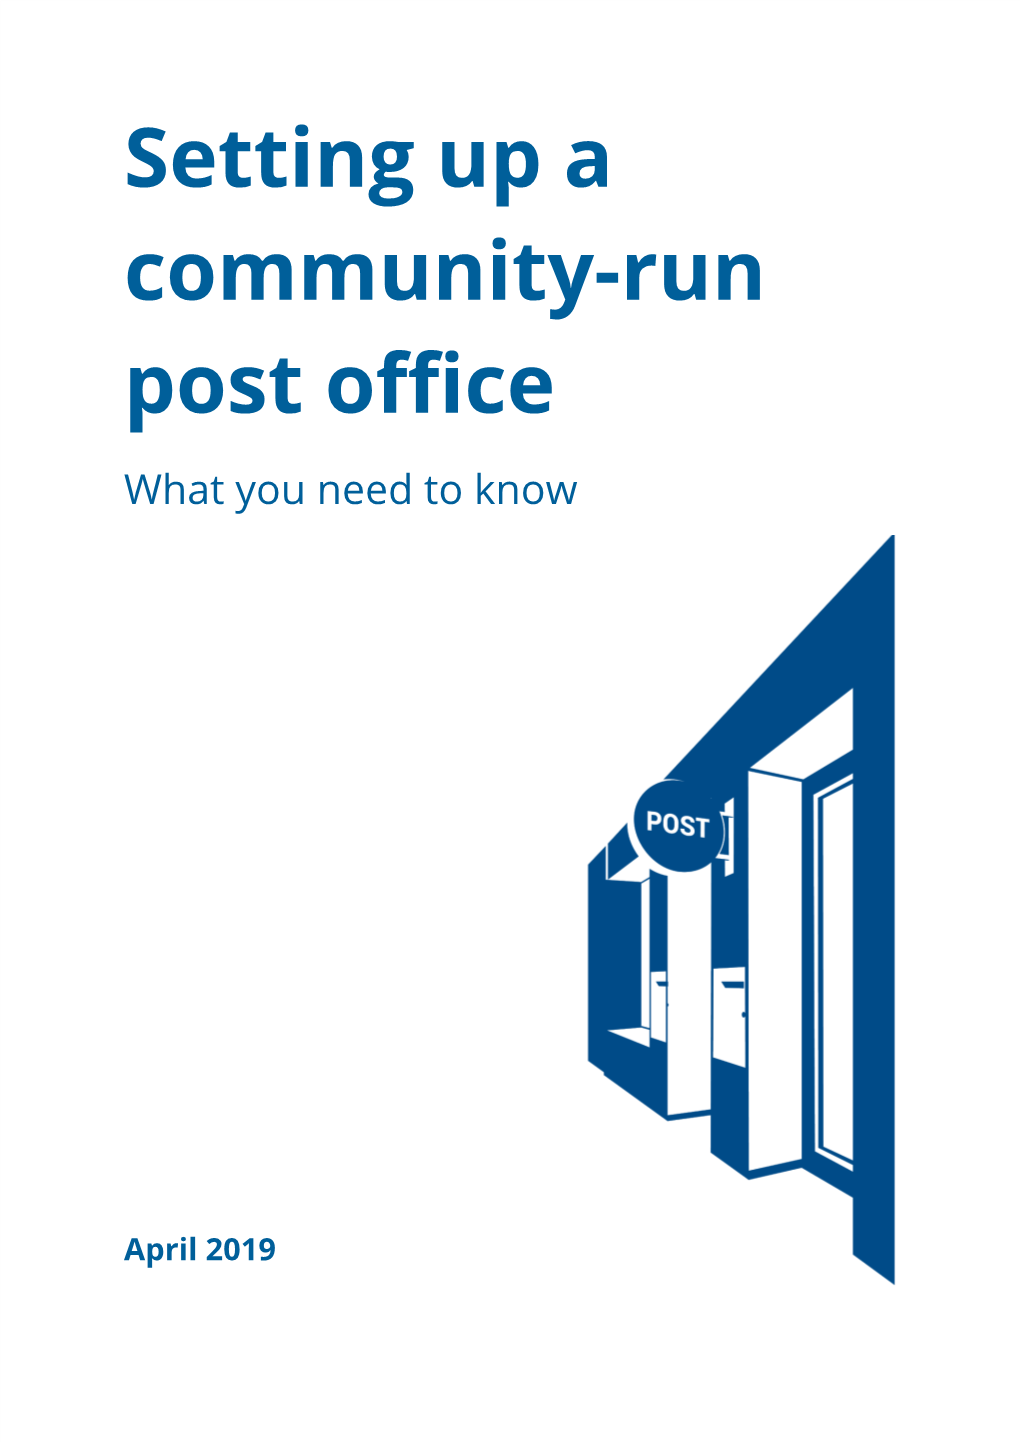 Setting up a Community-Run Post Office What You Need to Know